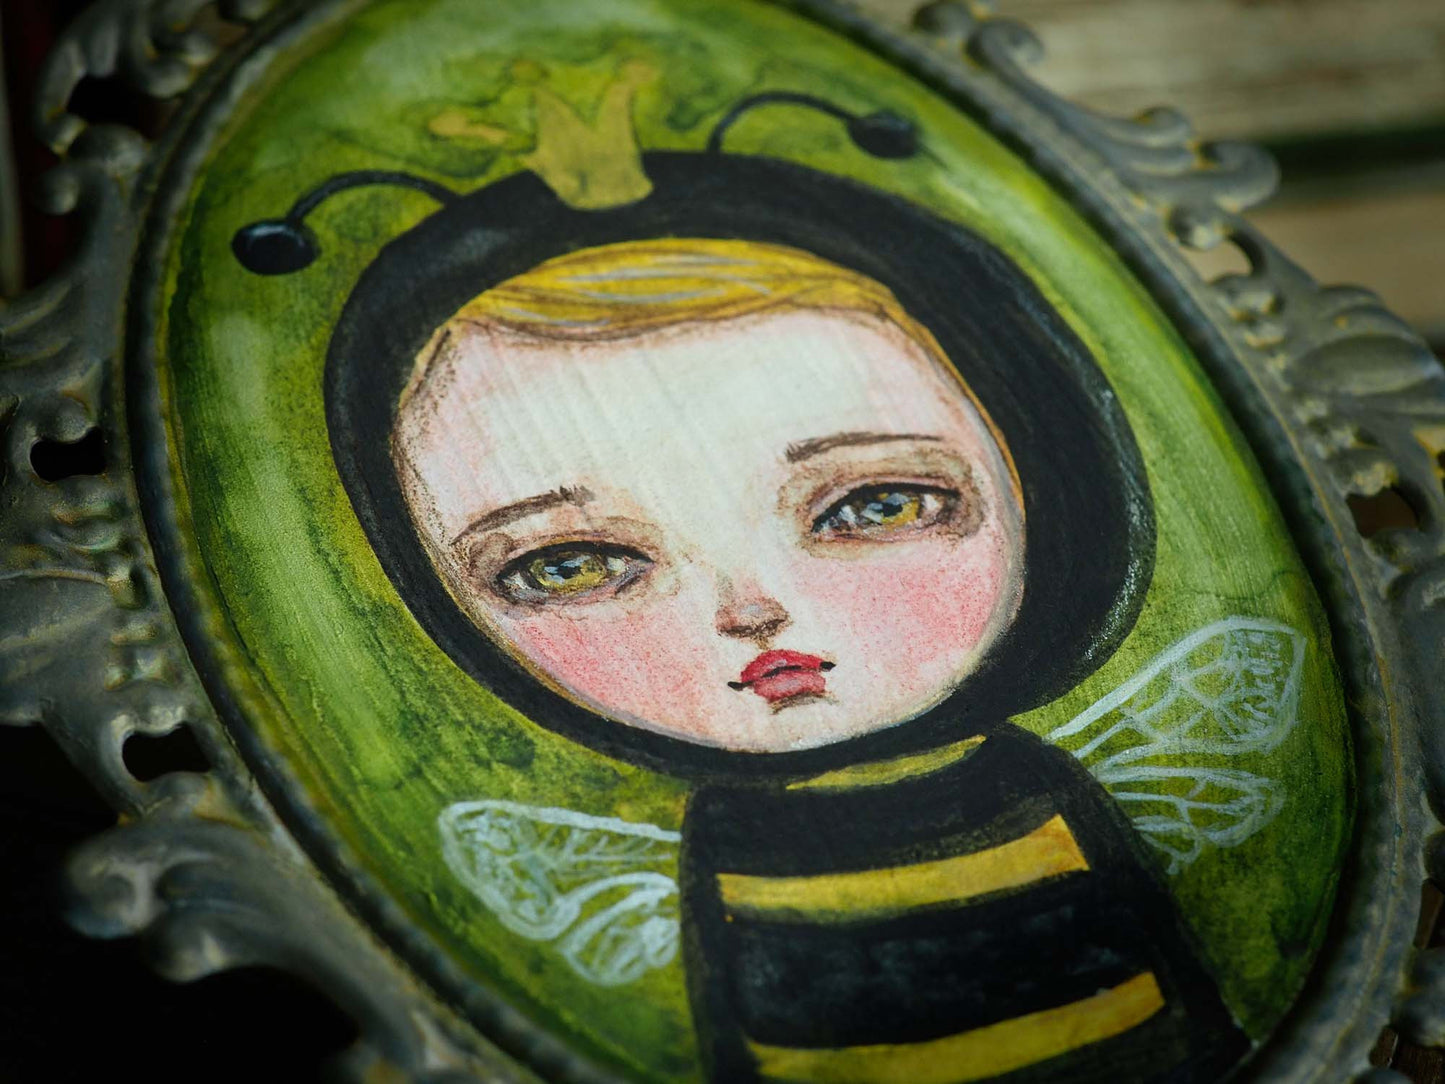 Childhood memories and a little boy inspired this bee painting watercolor by Danita